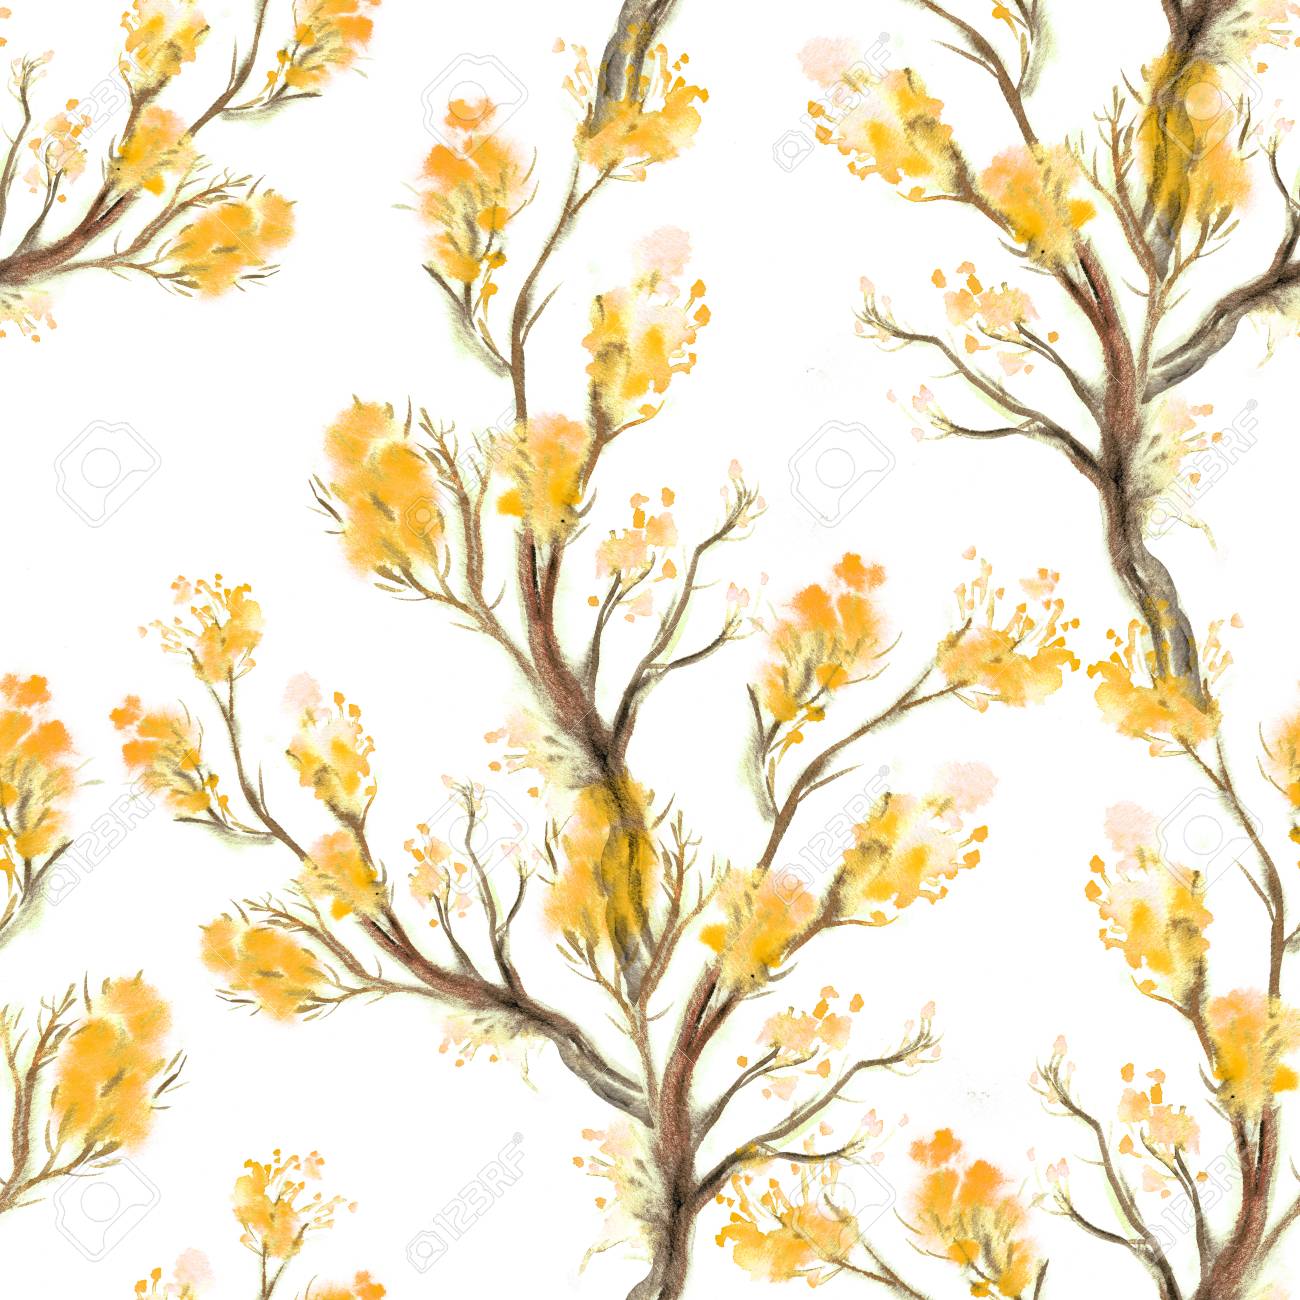 Spring Wallpaper With Flowers Watercolor Floral Seamless Pattern